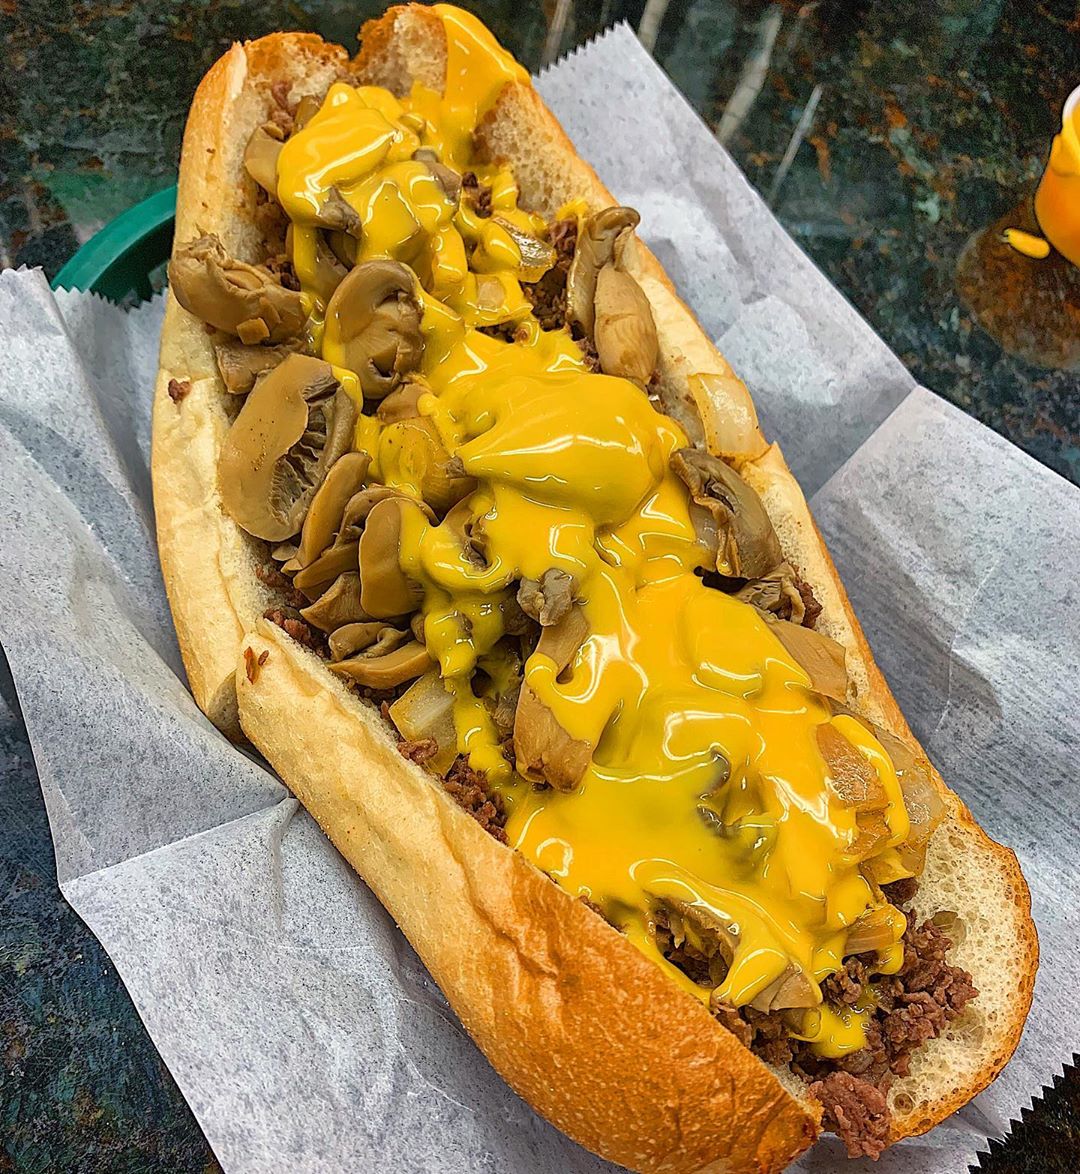 Philly cheesesteak covered in mushrooms and nacho cheese. Photo by Instagram user @manswhoate